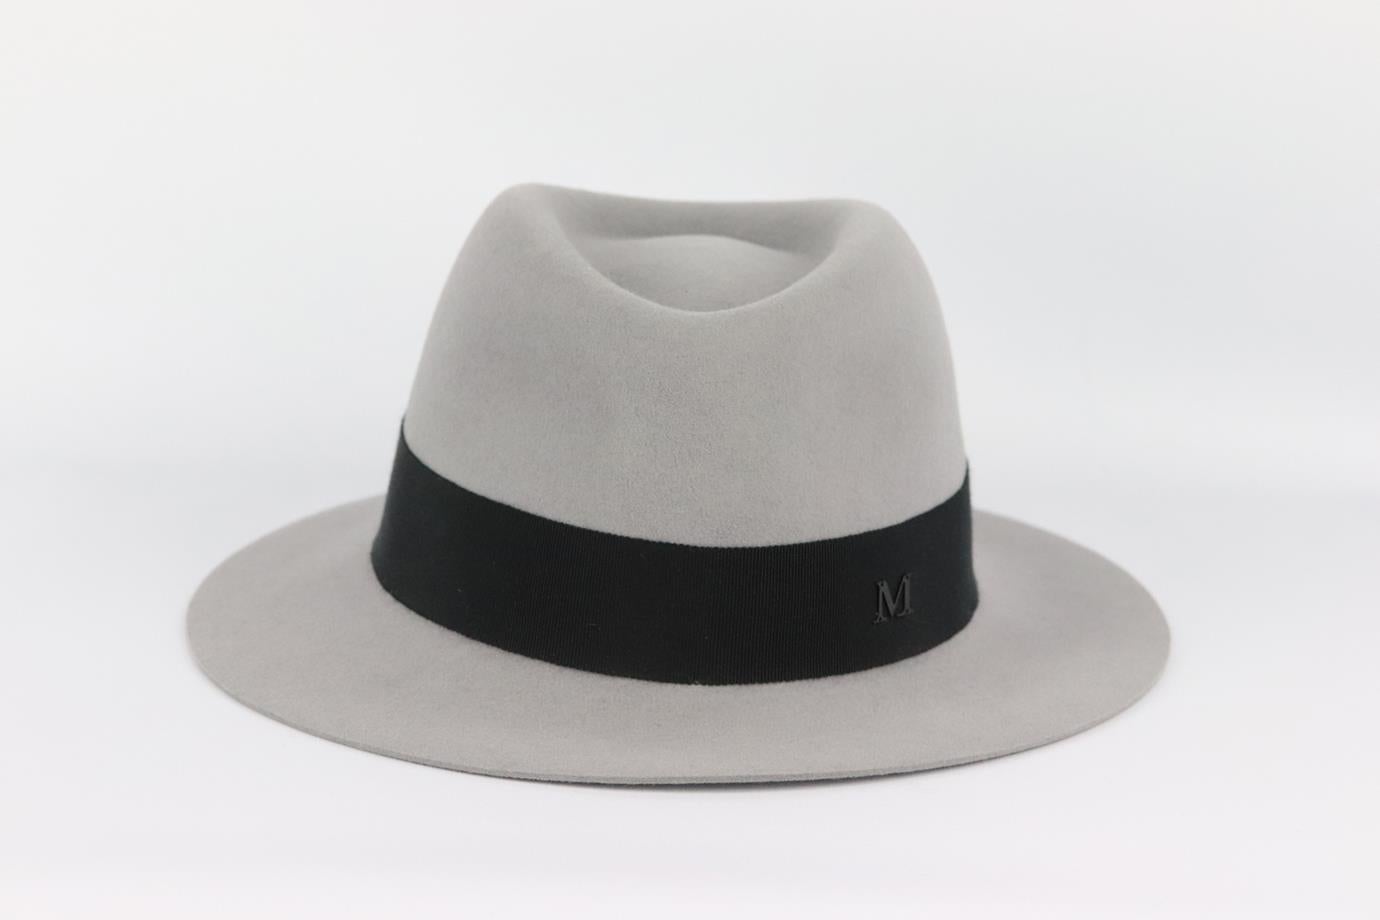 Maison Michel grosgrain trimmed wool felt fedora. Grey and black. Pull on. 100% Wool; trim: 56% cotton, 44% viscose. Does not come with dustbag or box. Size: Small. Circumference: 22.6 in. Brim Width: 2.5 in. Very good condition - No sign of wear;